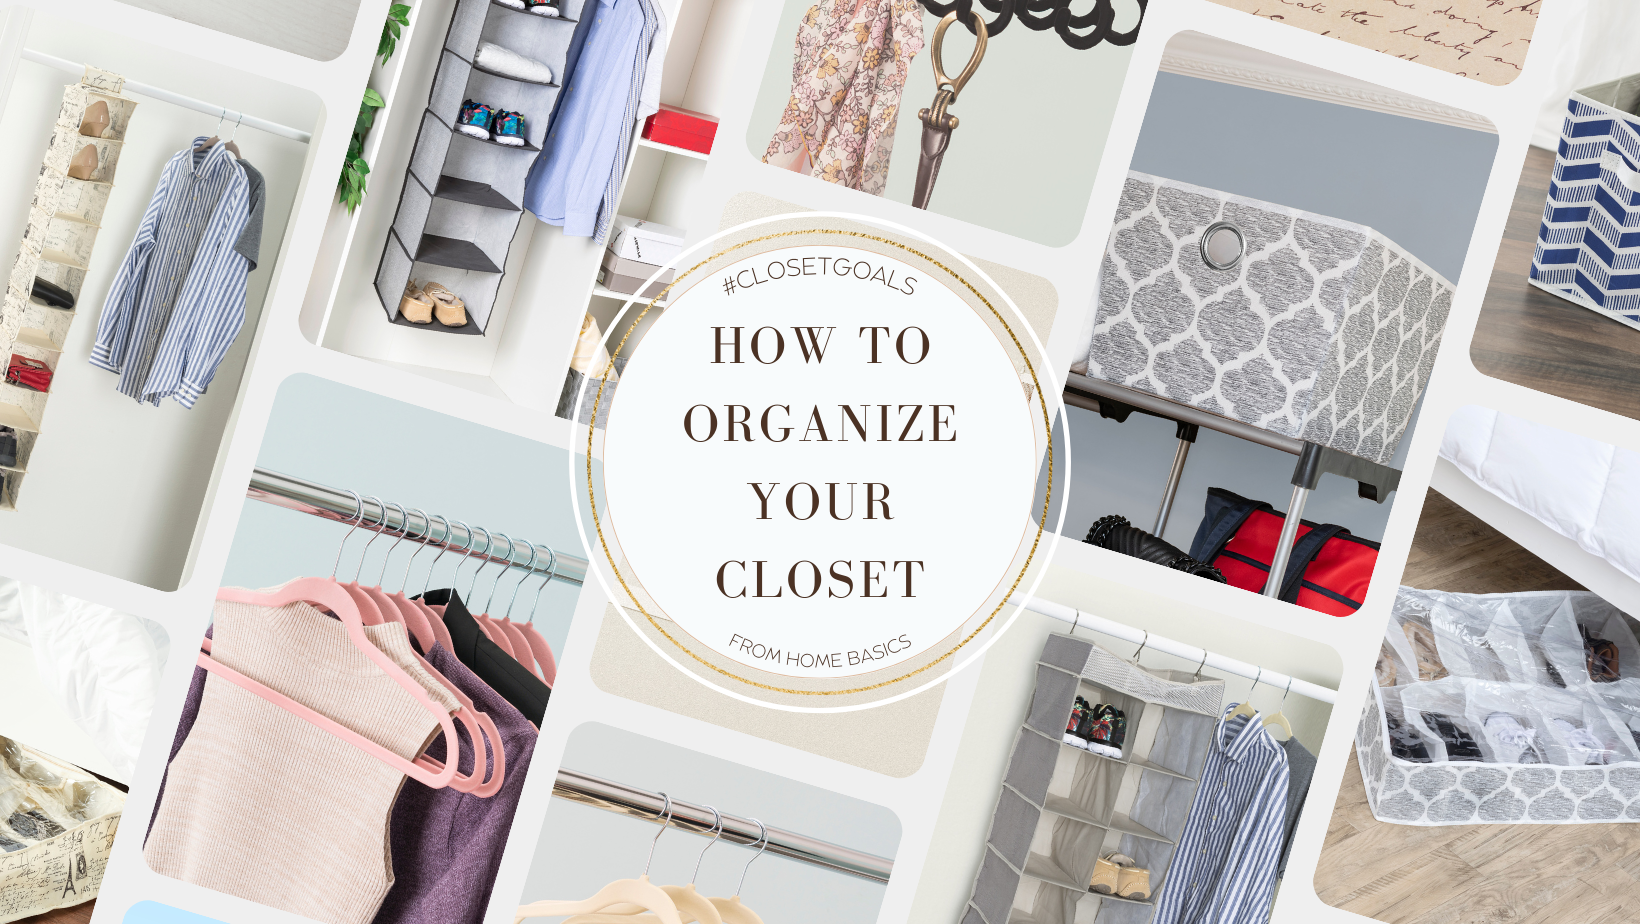 How To Organize Your Closet - A Step By Step Guide